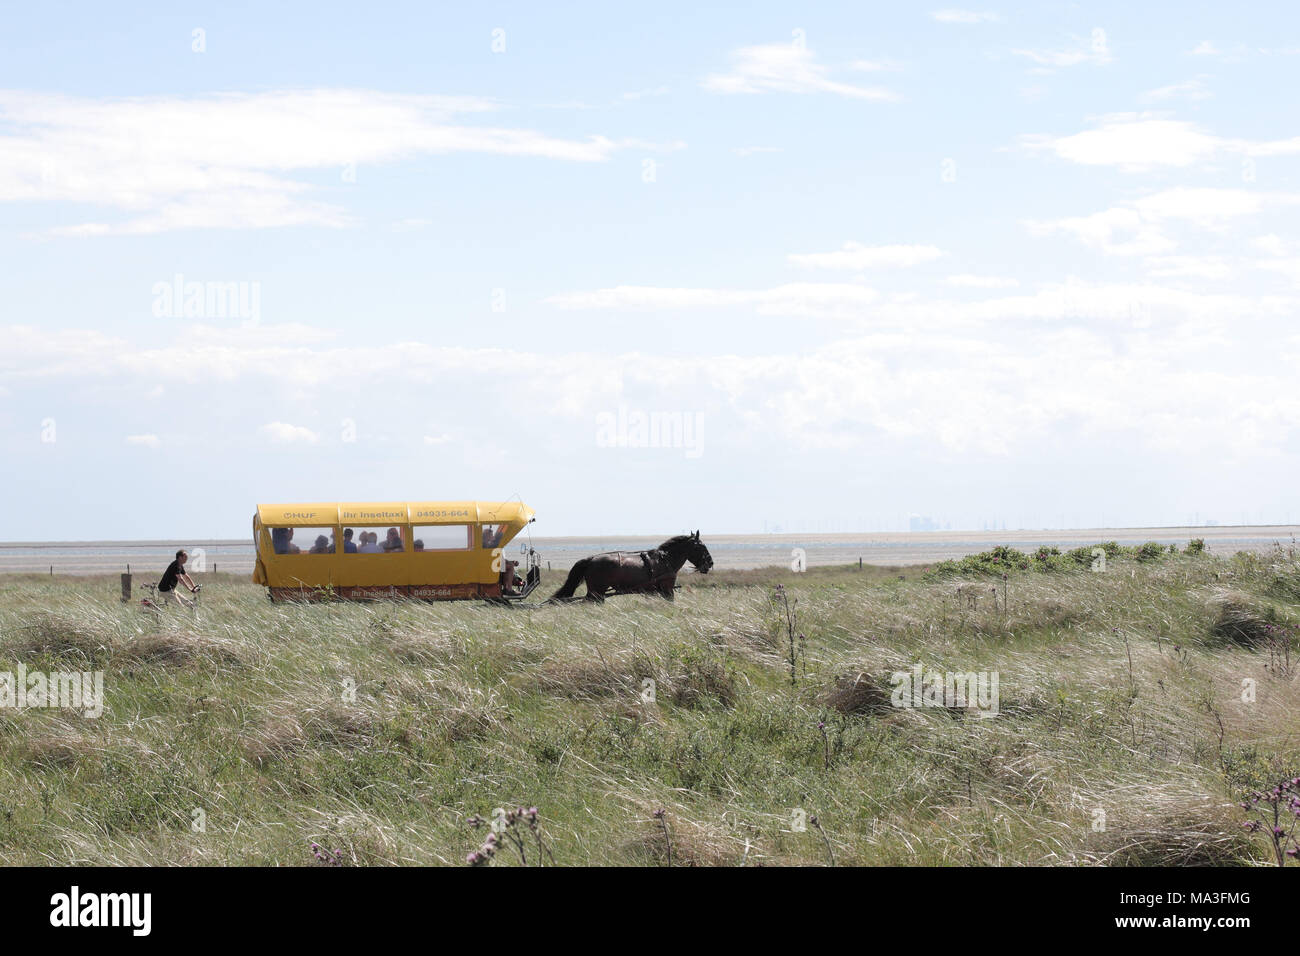 Horse-drawn carriage transporting tourists on the island of Juist Stock Photo